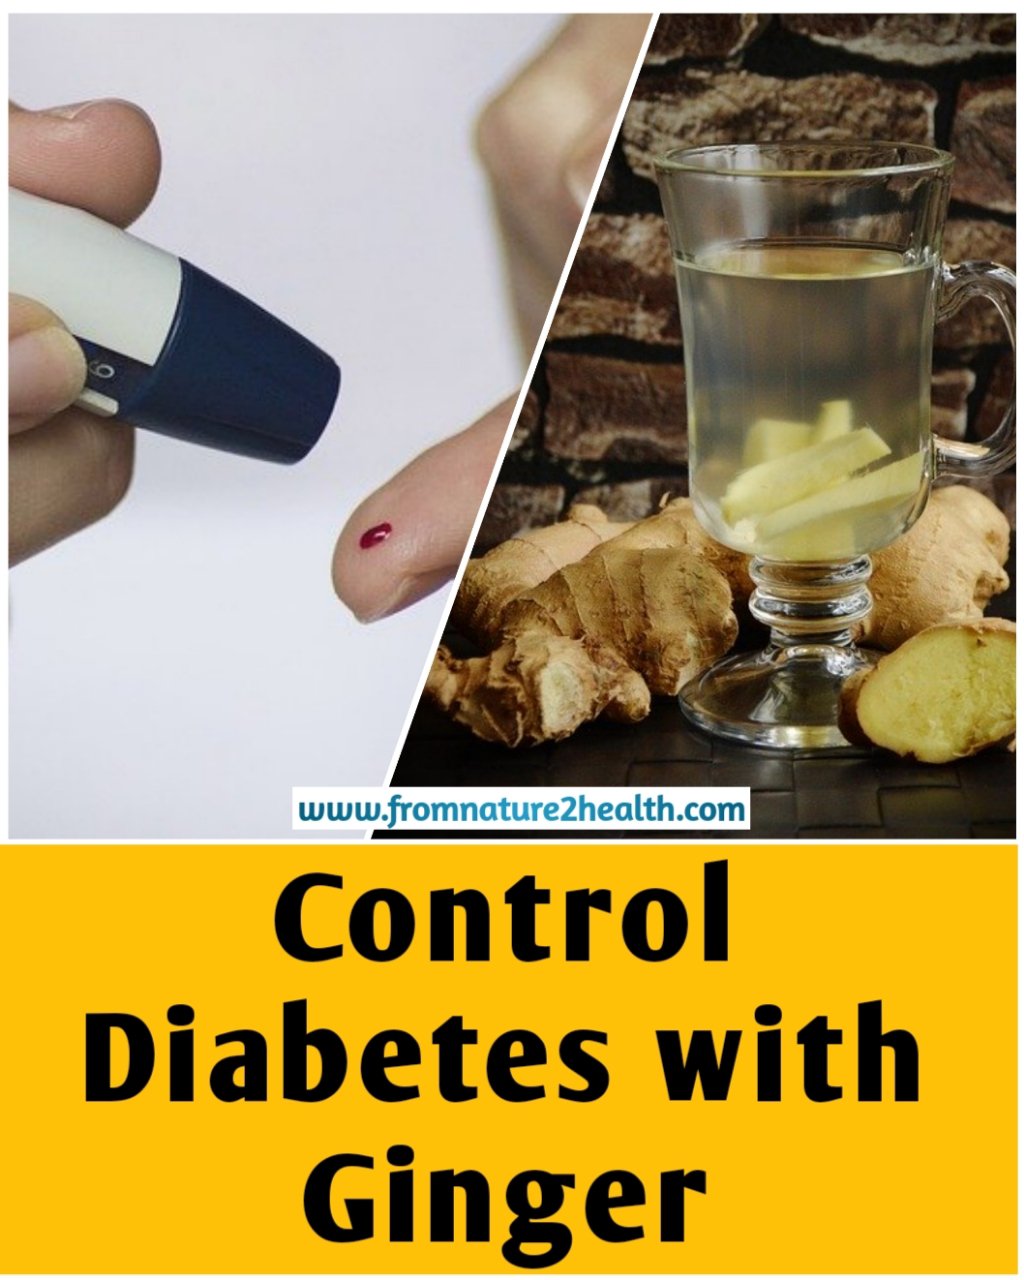 Control Diabetes with Ginger